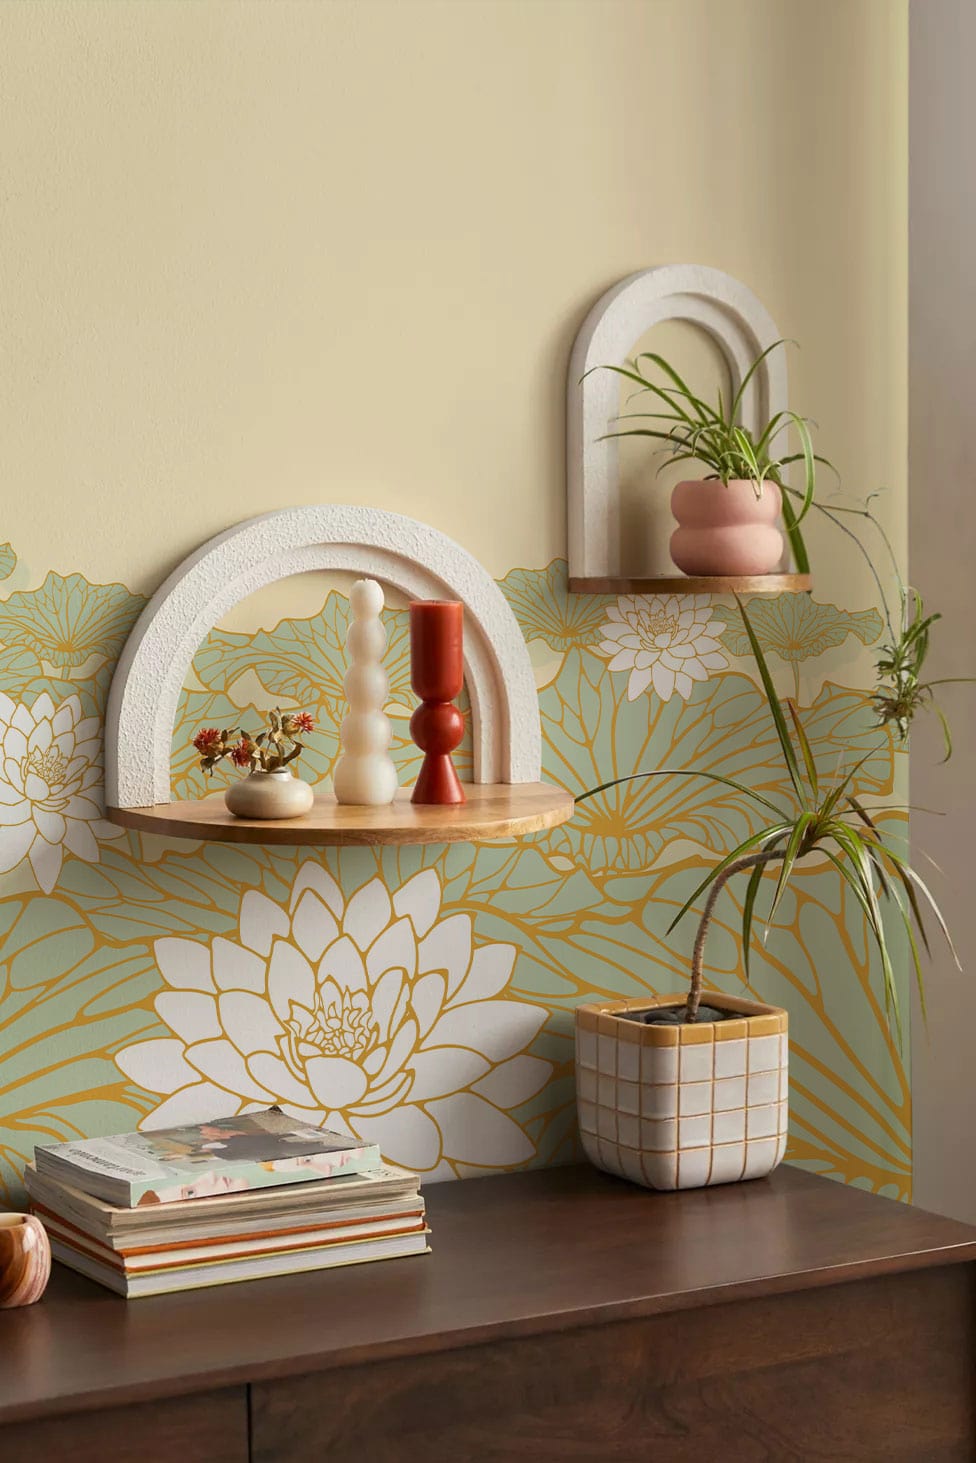 Wallpaper mural featuring an abstract lotus pool design, perfect for use in the hallway.